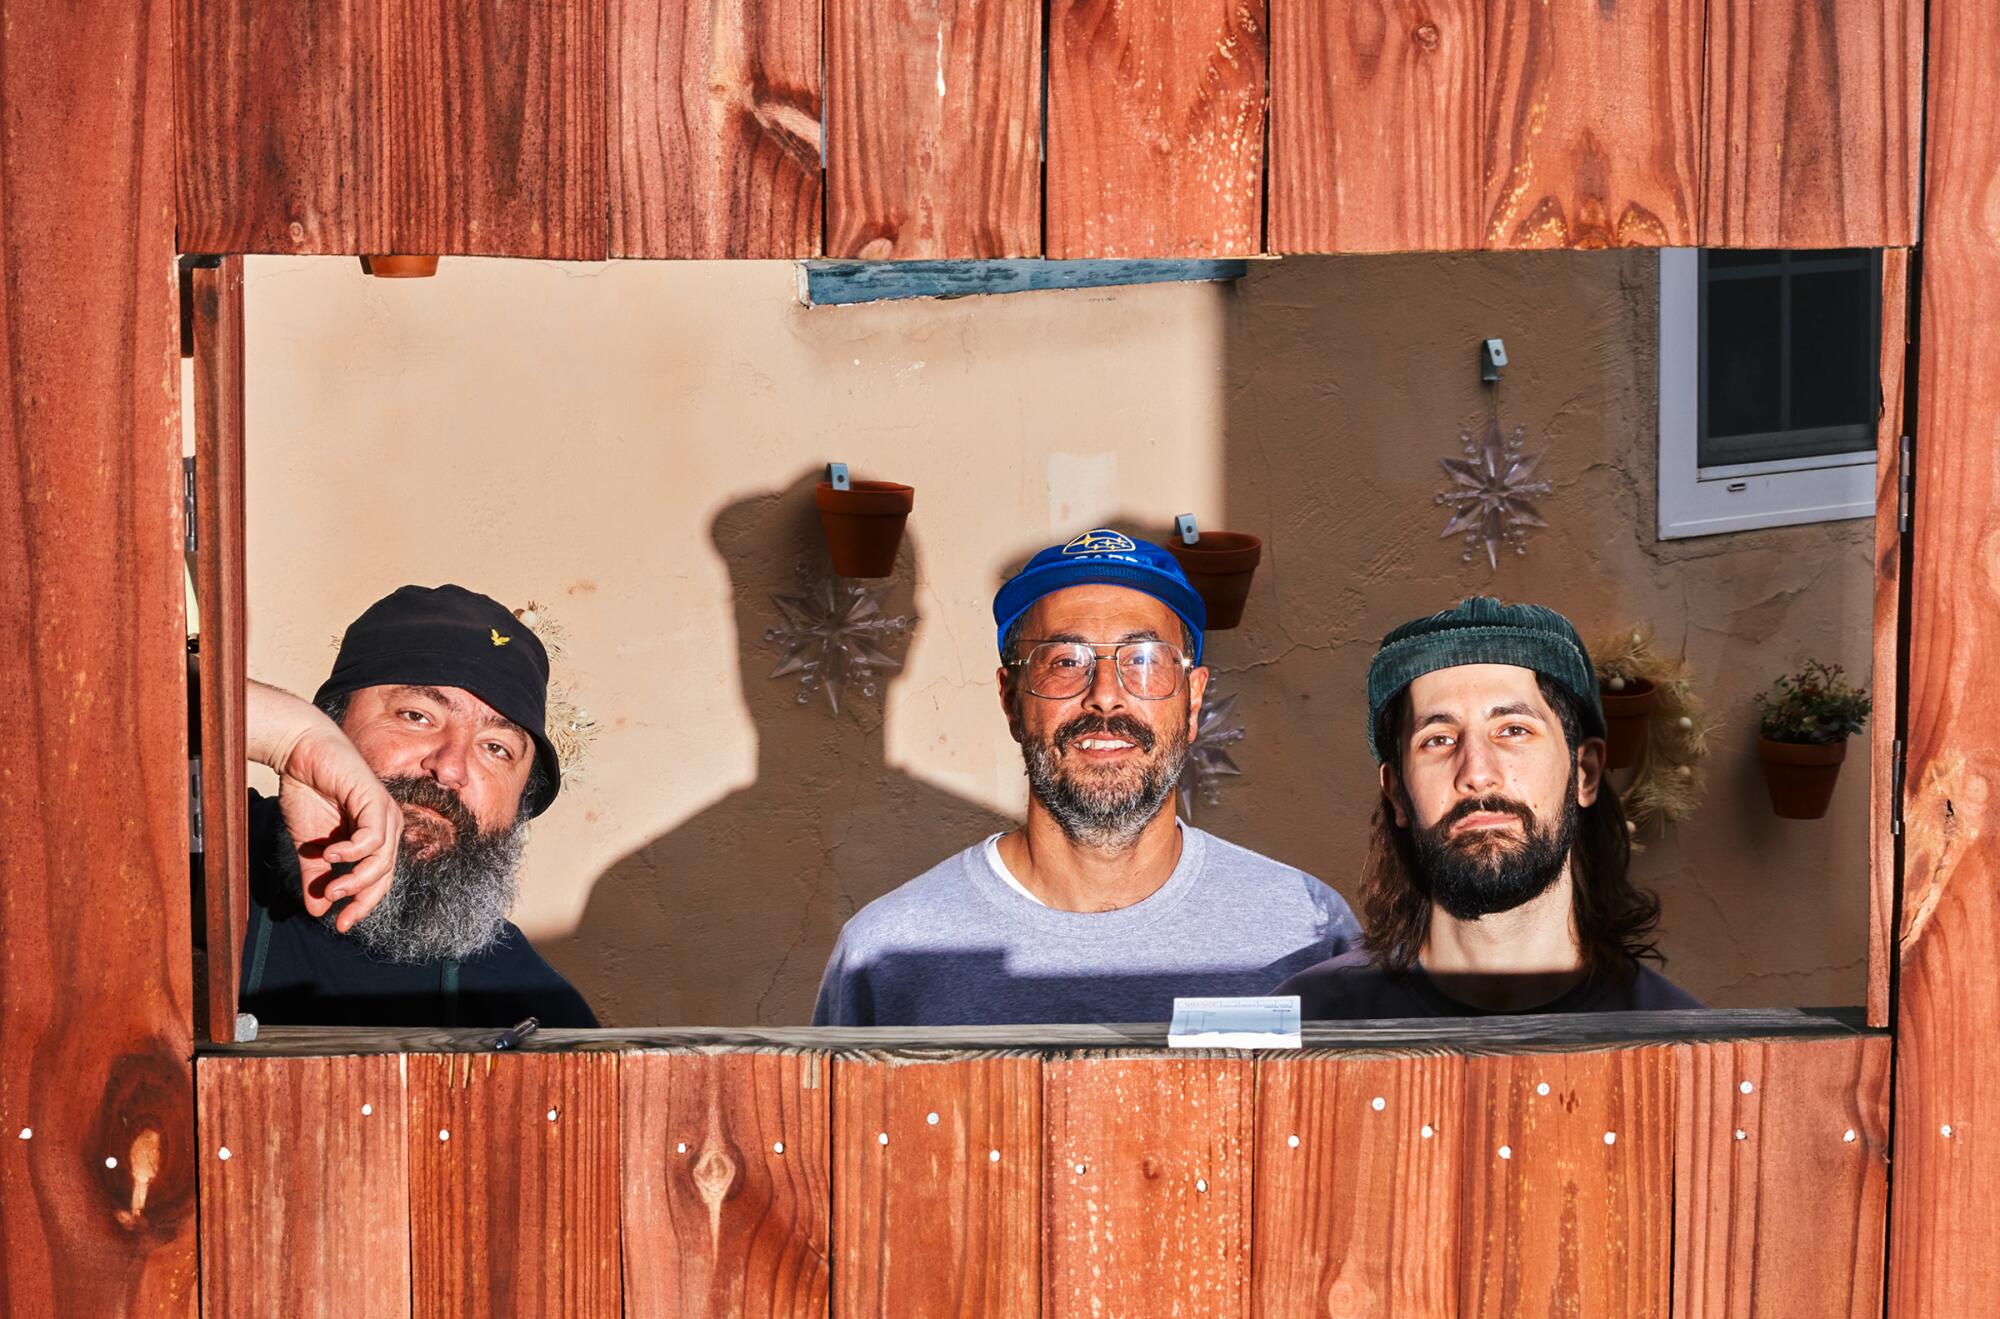 Three bearded men framed in a cutout in a wooden fence.